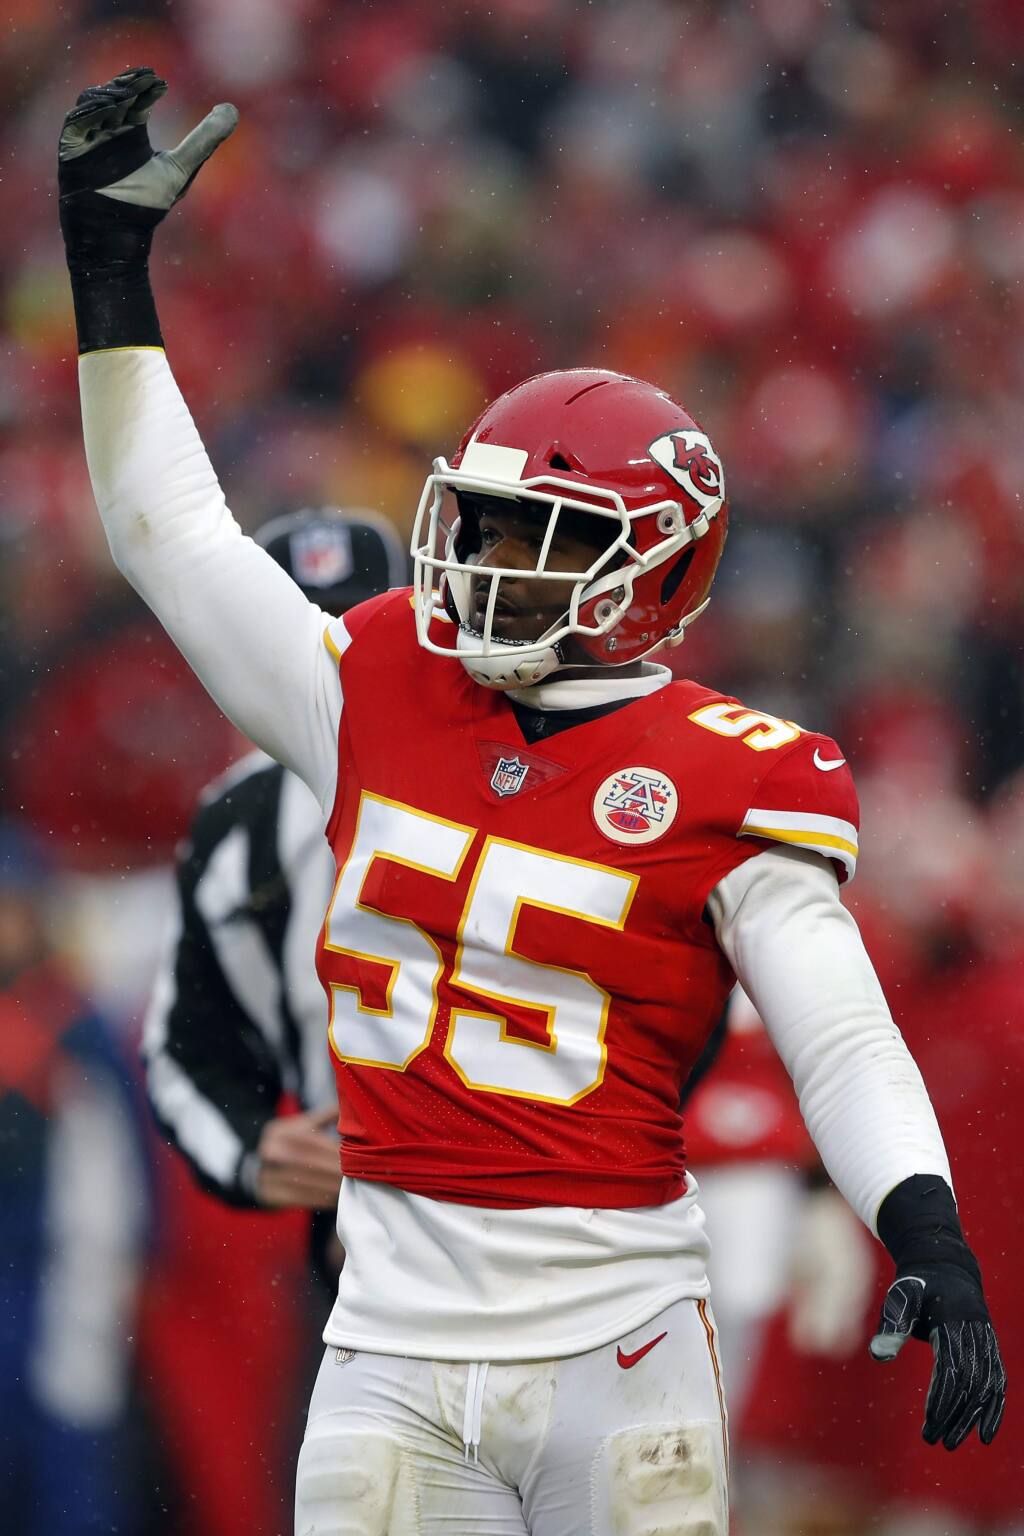 Kansas City Chiefs linebacker Dee Ford gestures during the first half of a divisional playoff game against the Indianapolis Colts in Kansas City, Mo., Saturday, Jan. 12, 2019. (AP Photo/Charlie Neibergall)